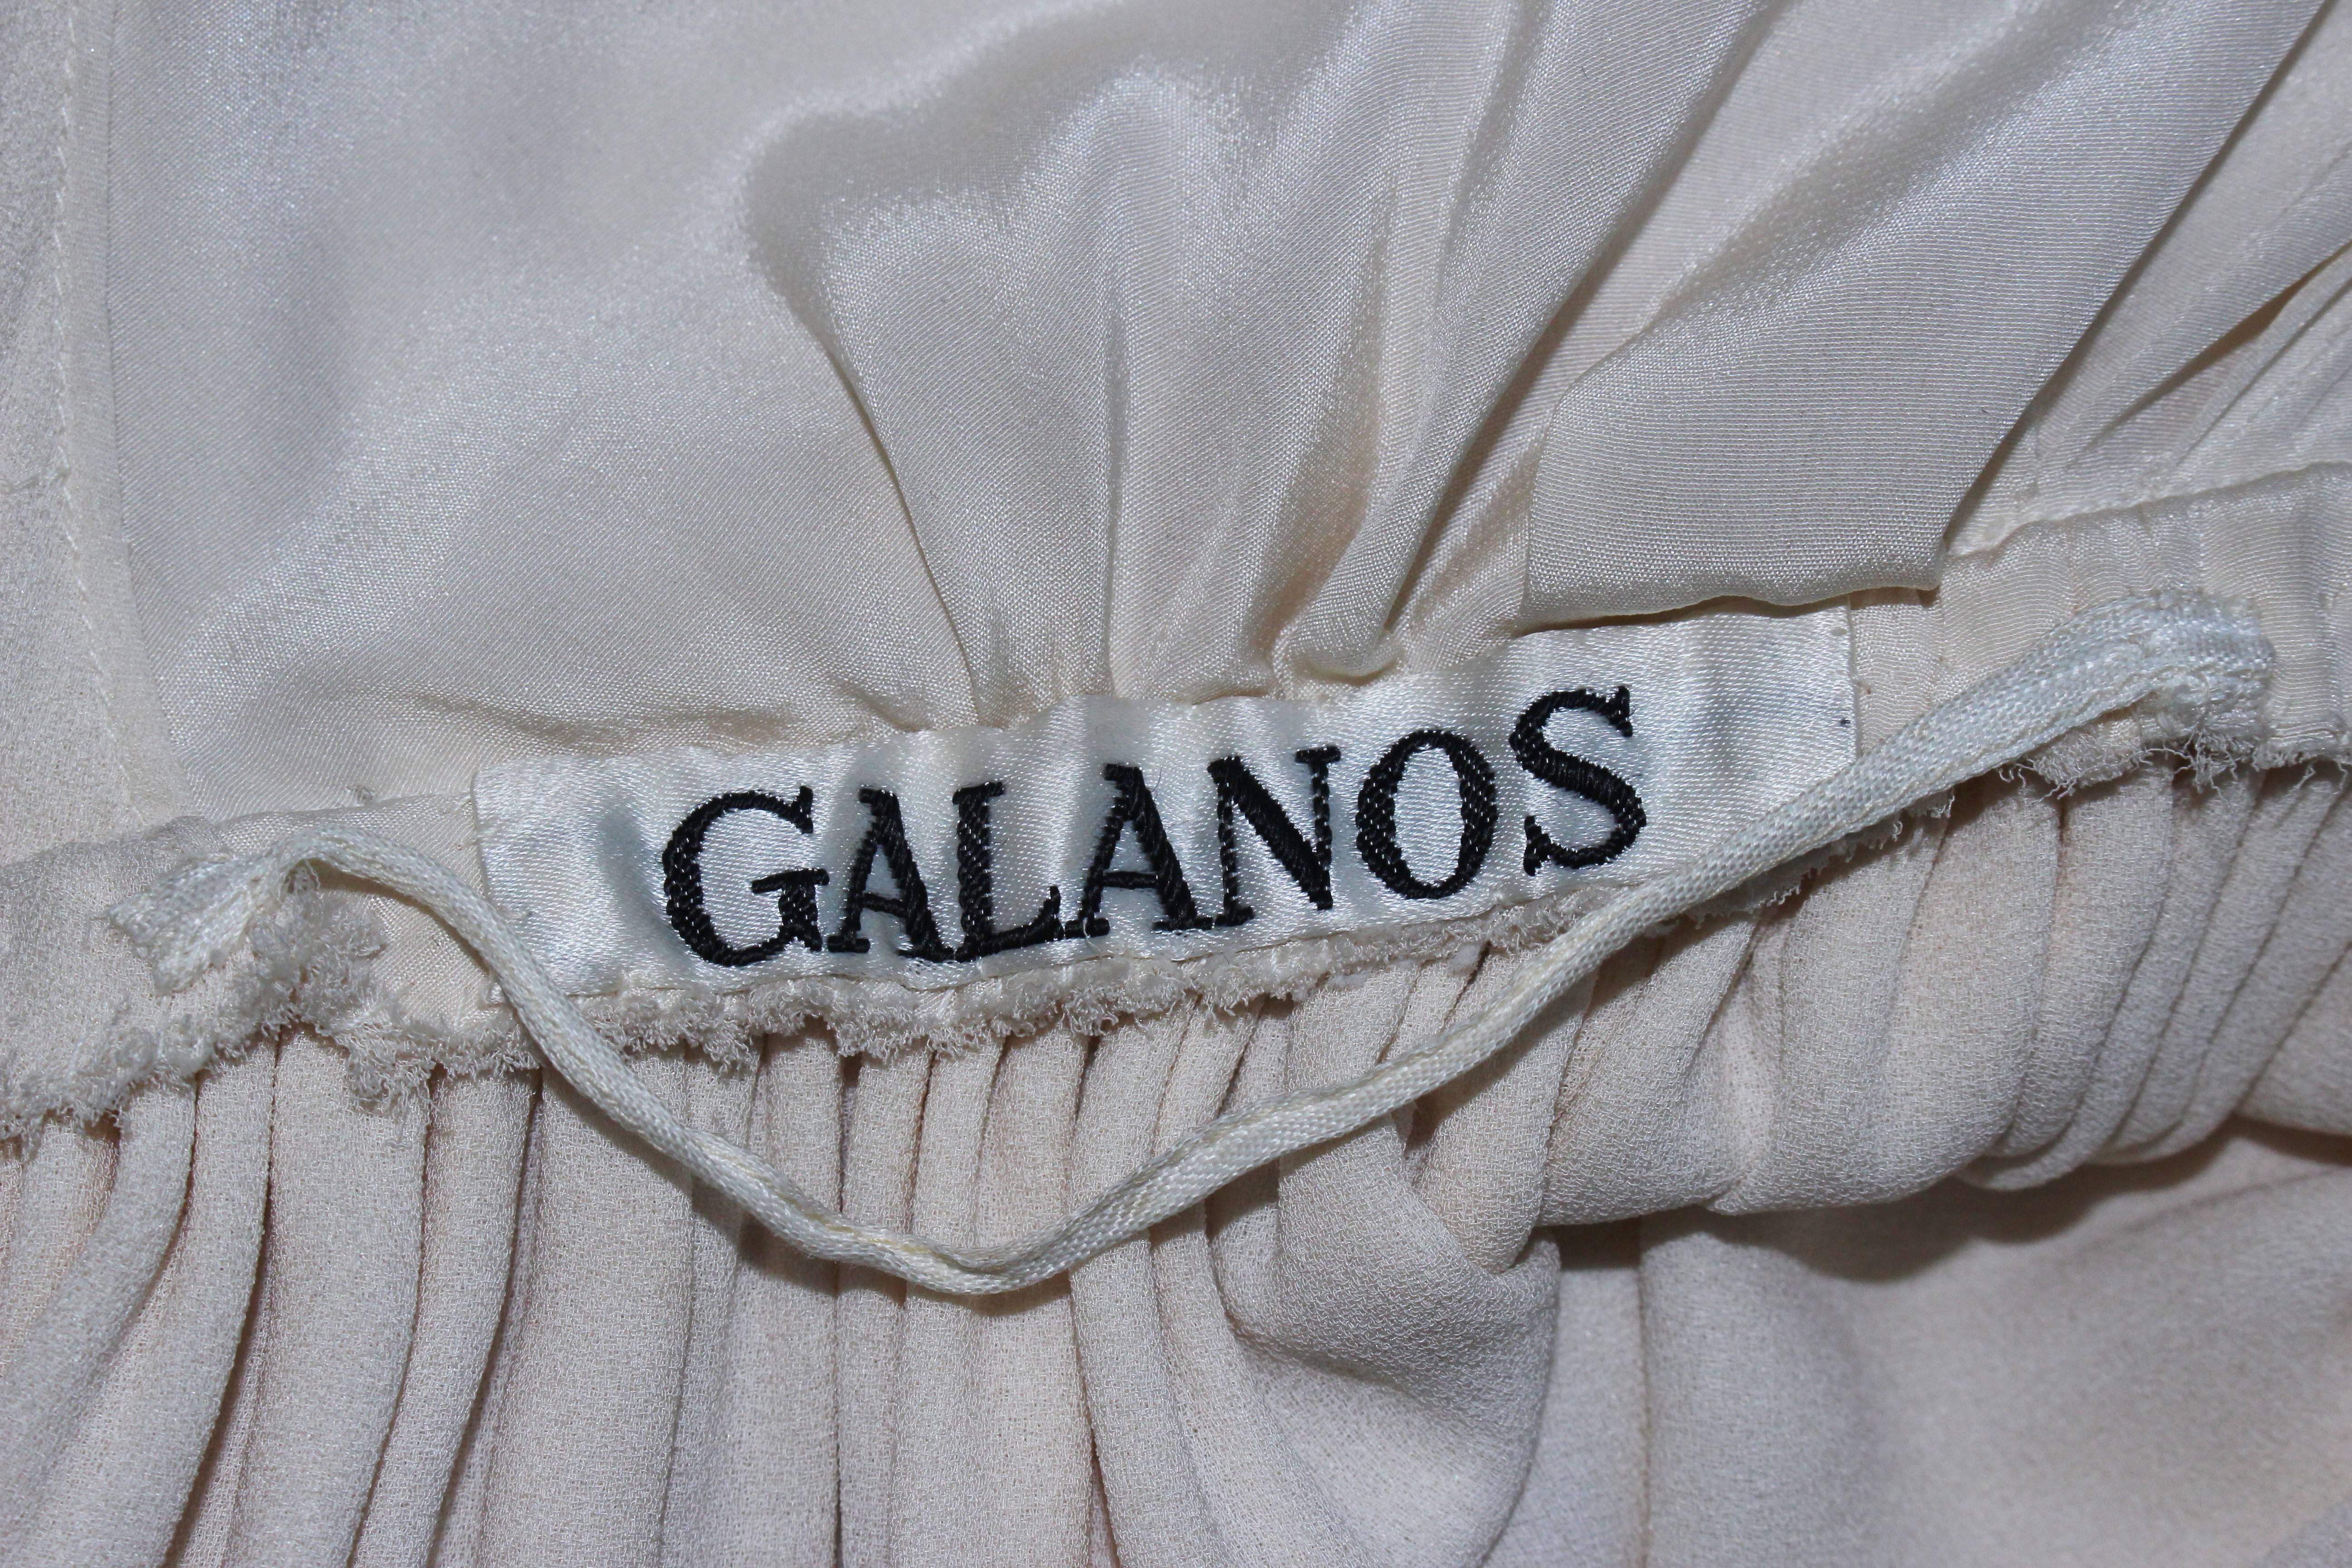 GALANOS Cream Silk Halter Gown with White Trim and Exposed Back Size 0 2 For Sale 5